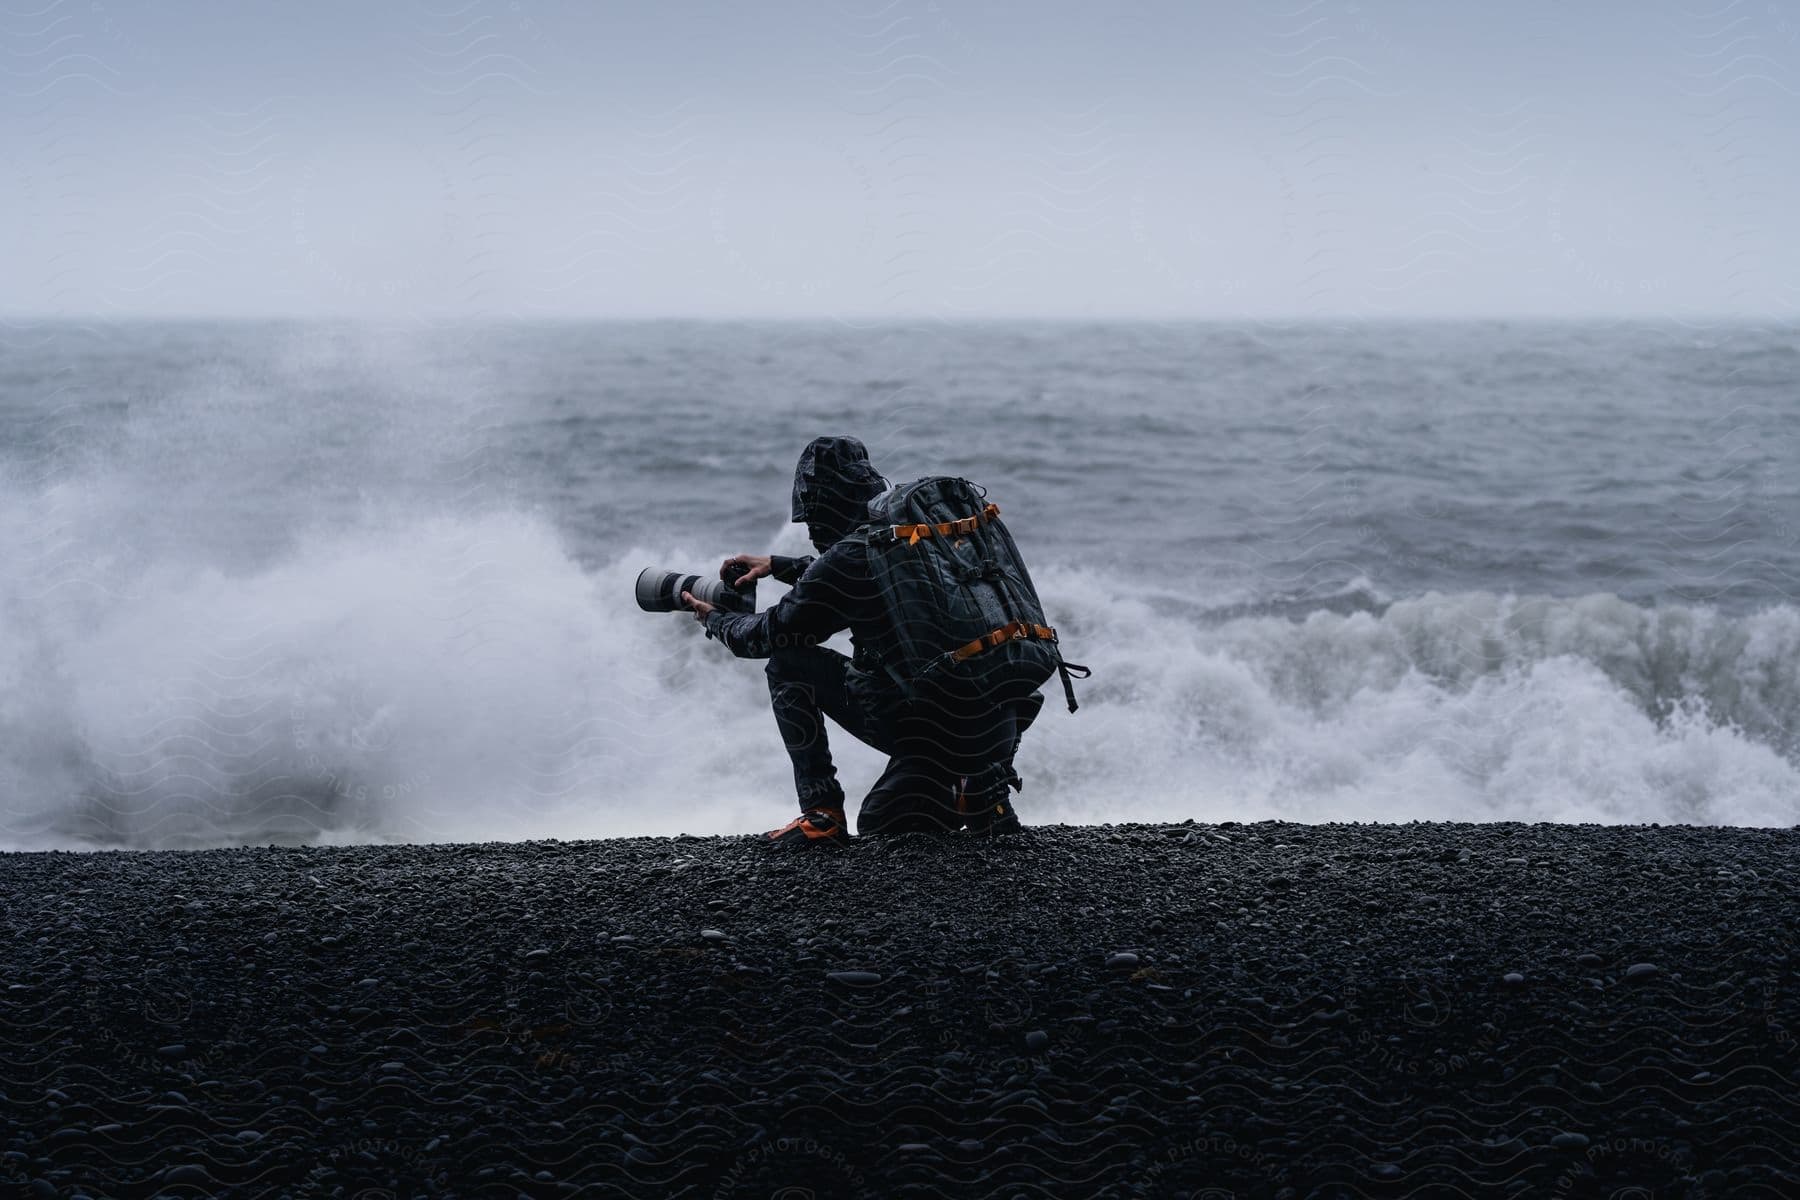 A photographer with backpack aiming camera at rough sea from rocky shore under gloomy weather